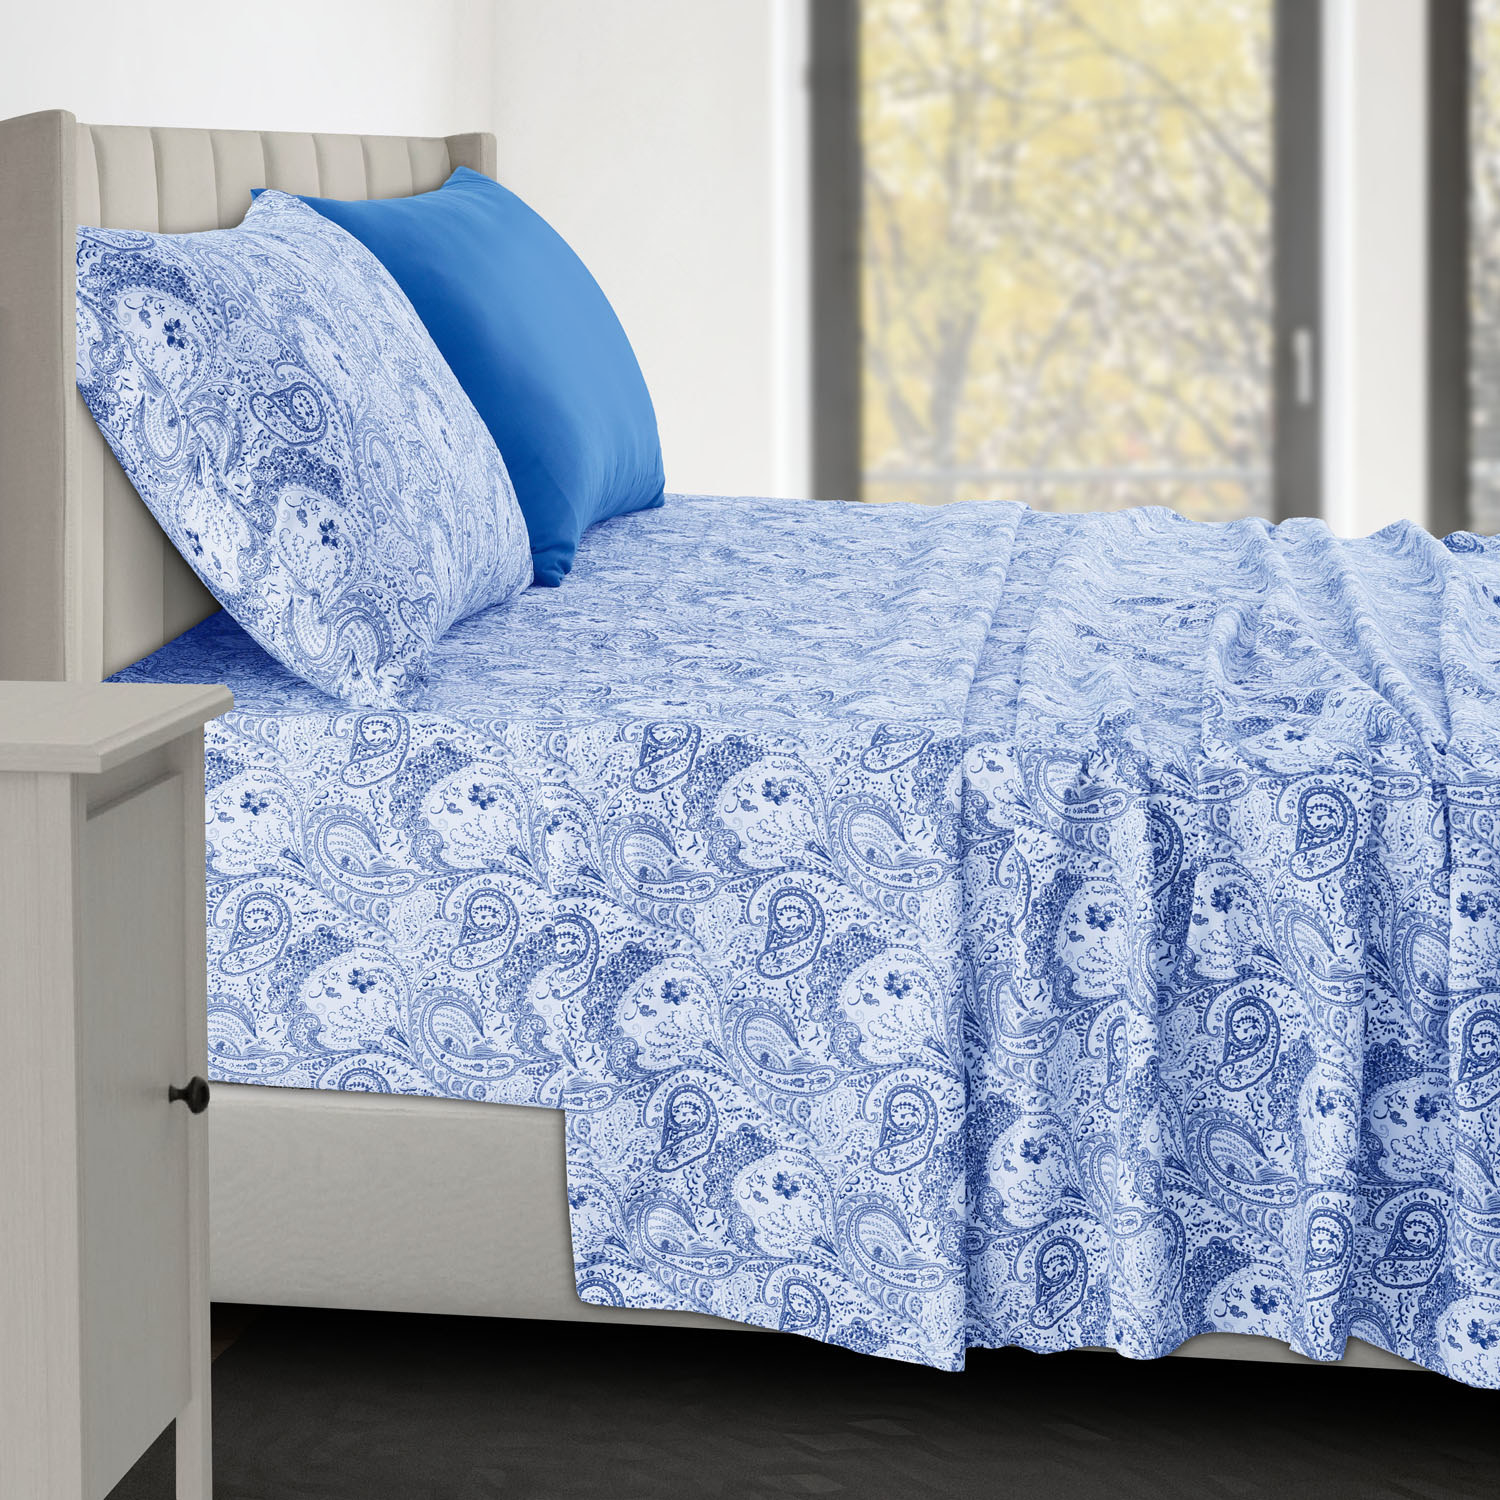 the blue and white paisley sheets